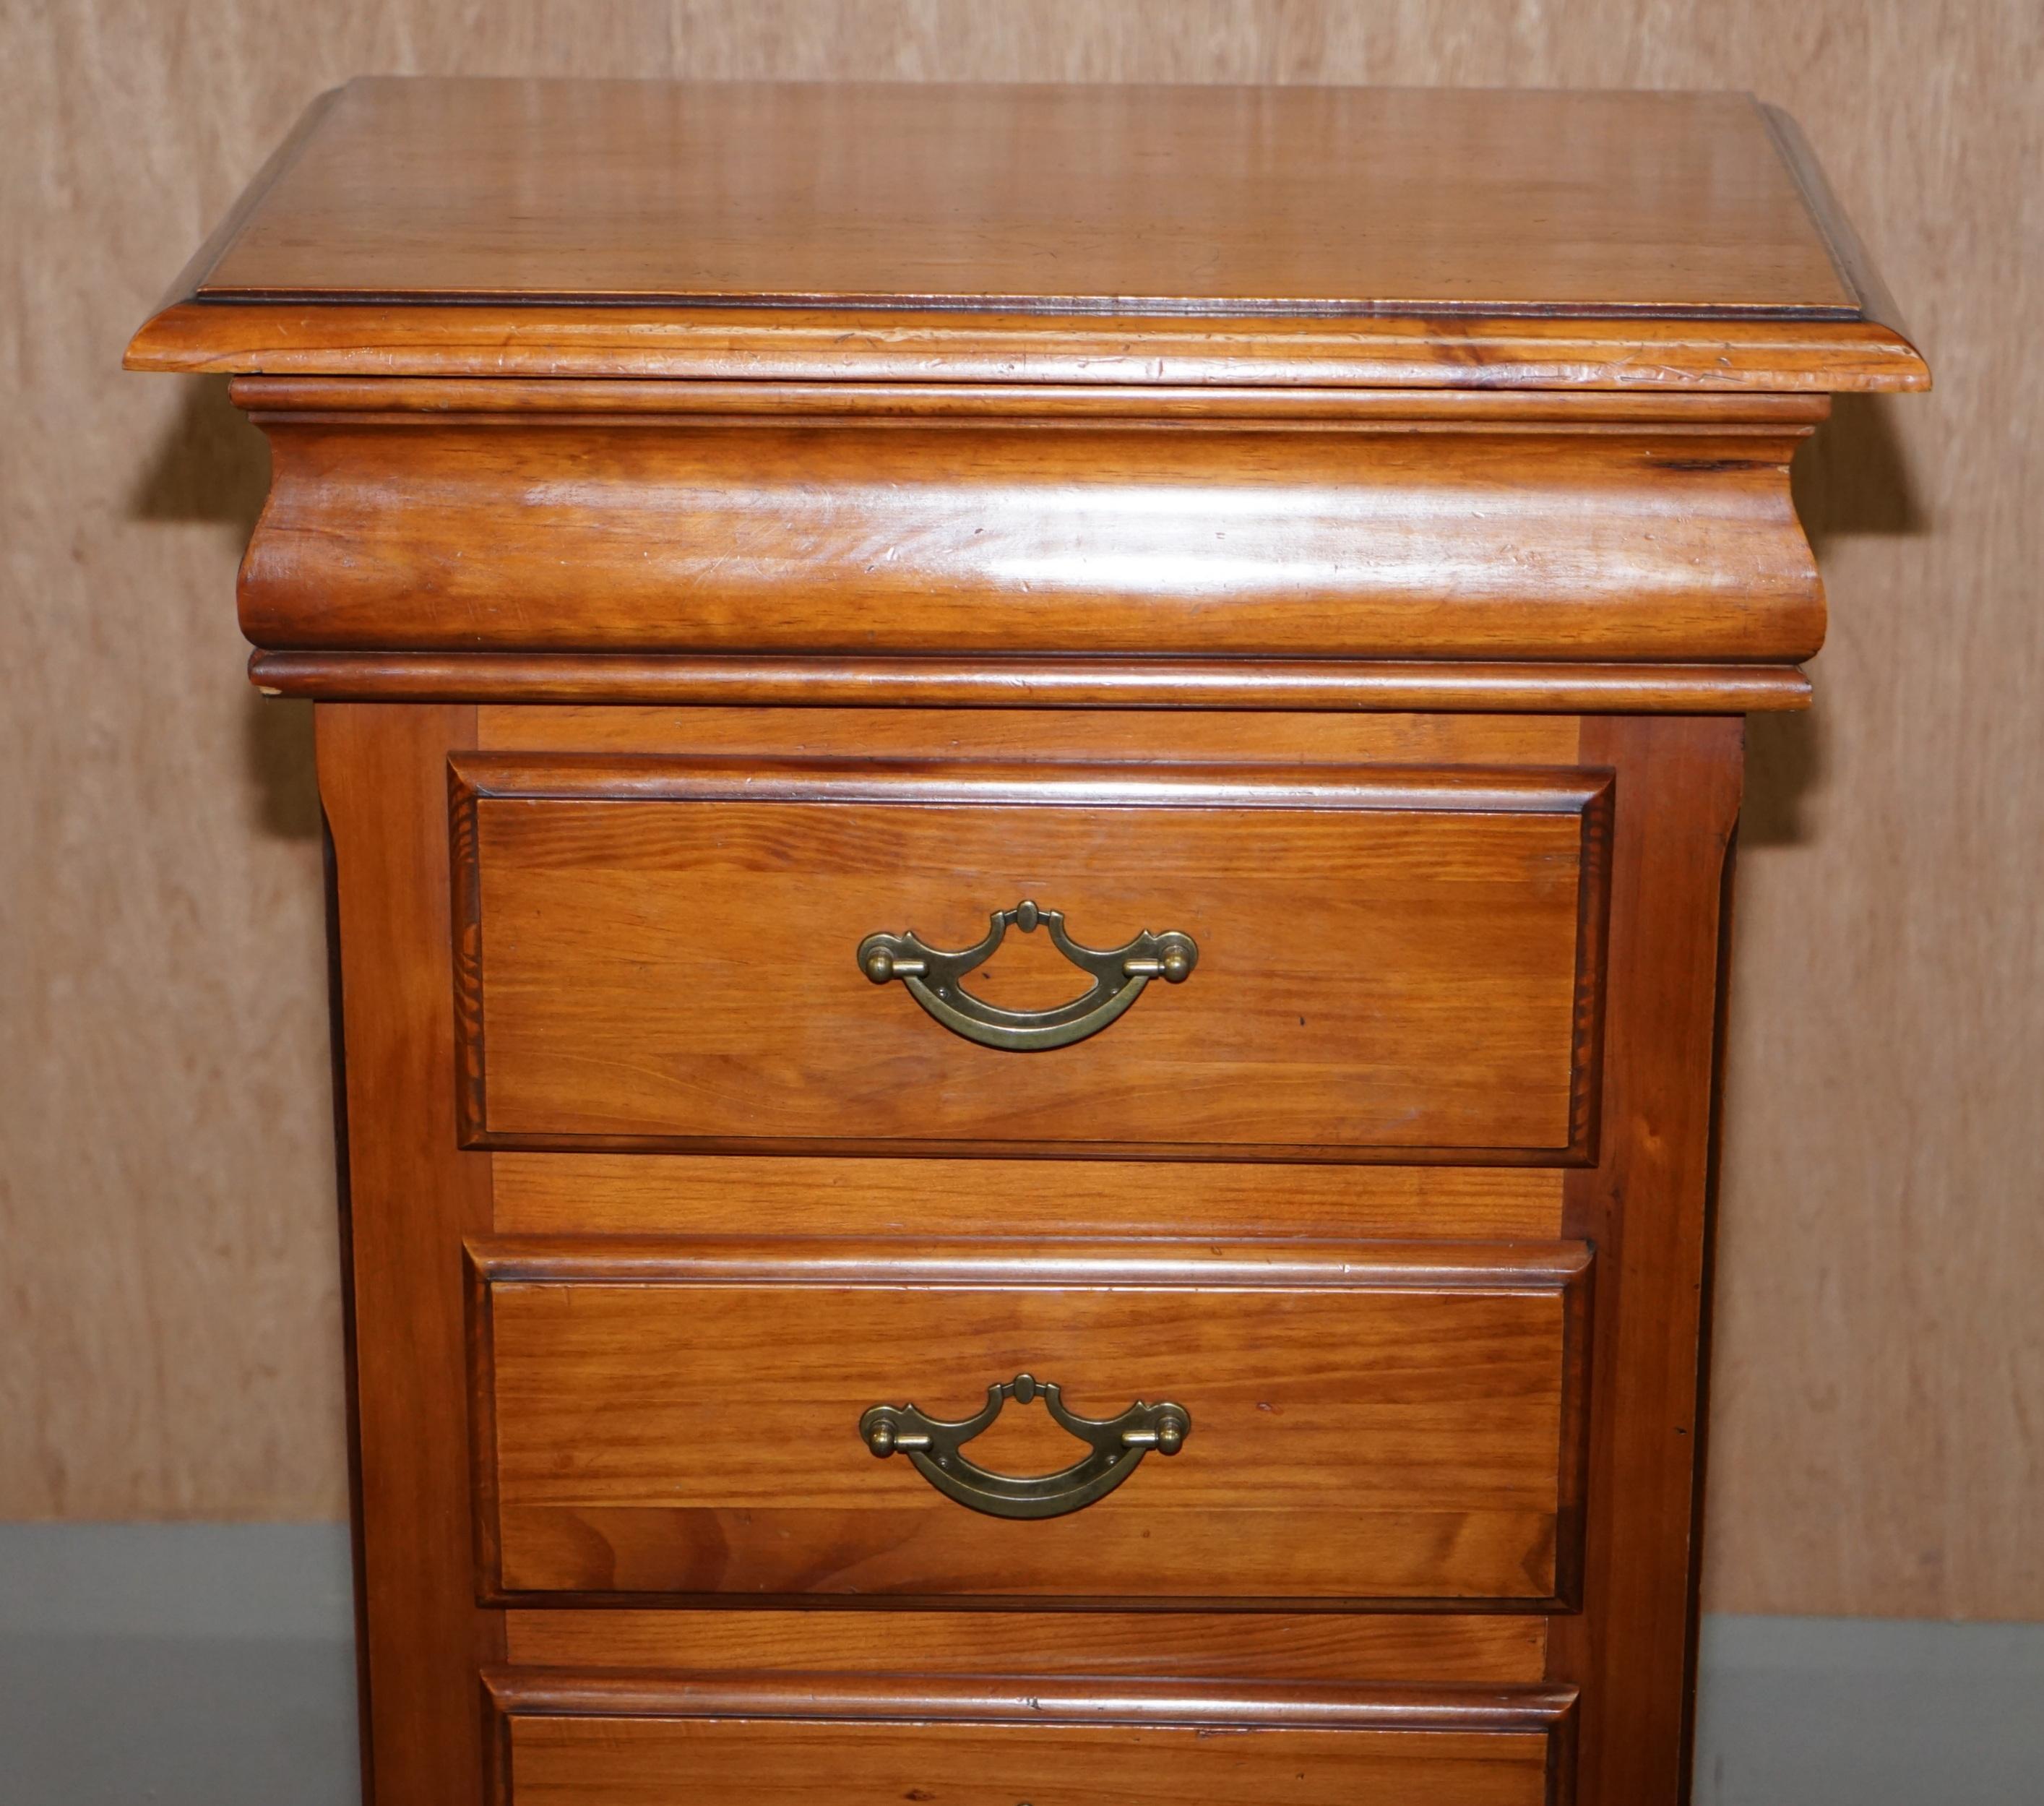 Pair of Bedside Table Drawers with Four Drawers Each, Cherry Color Wood 7